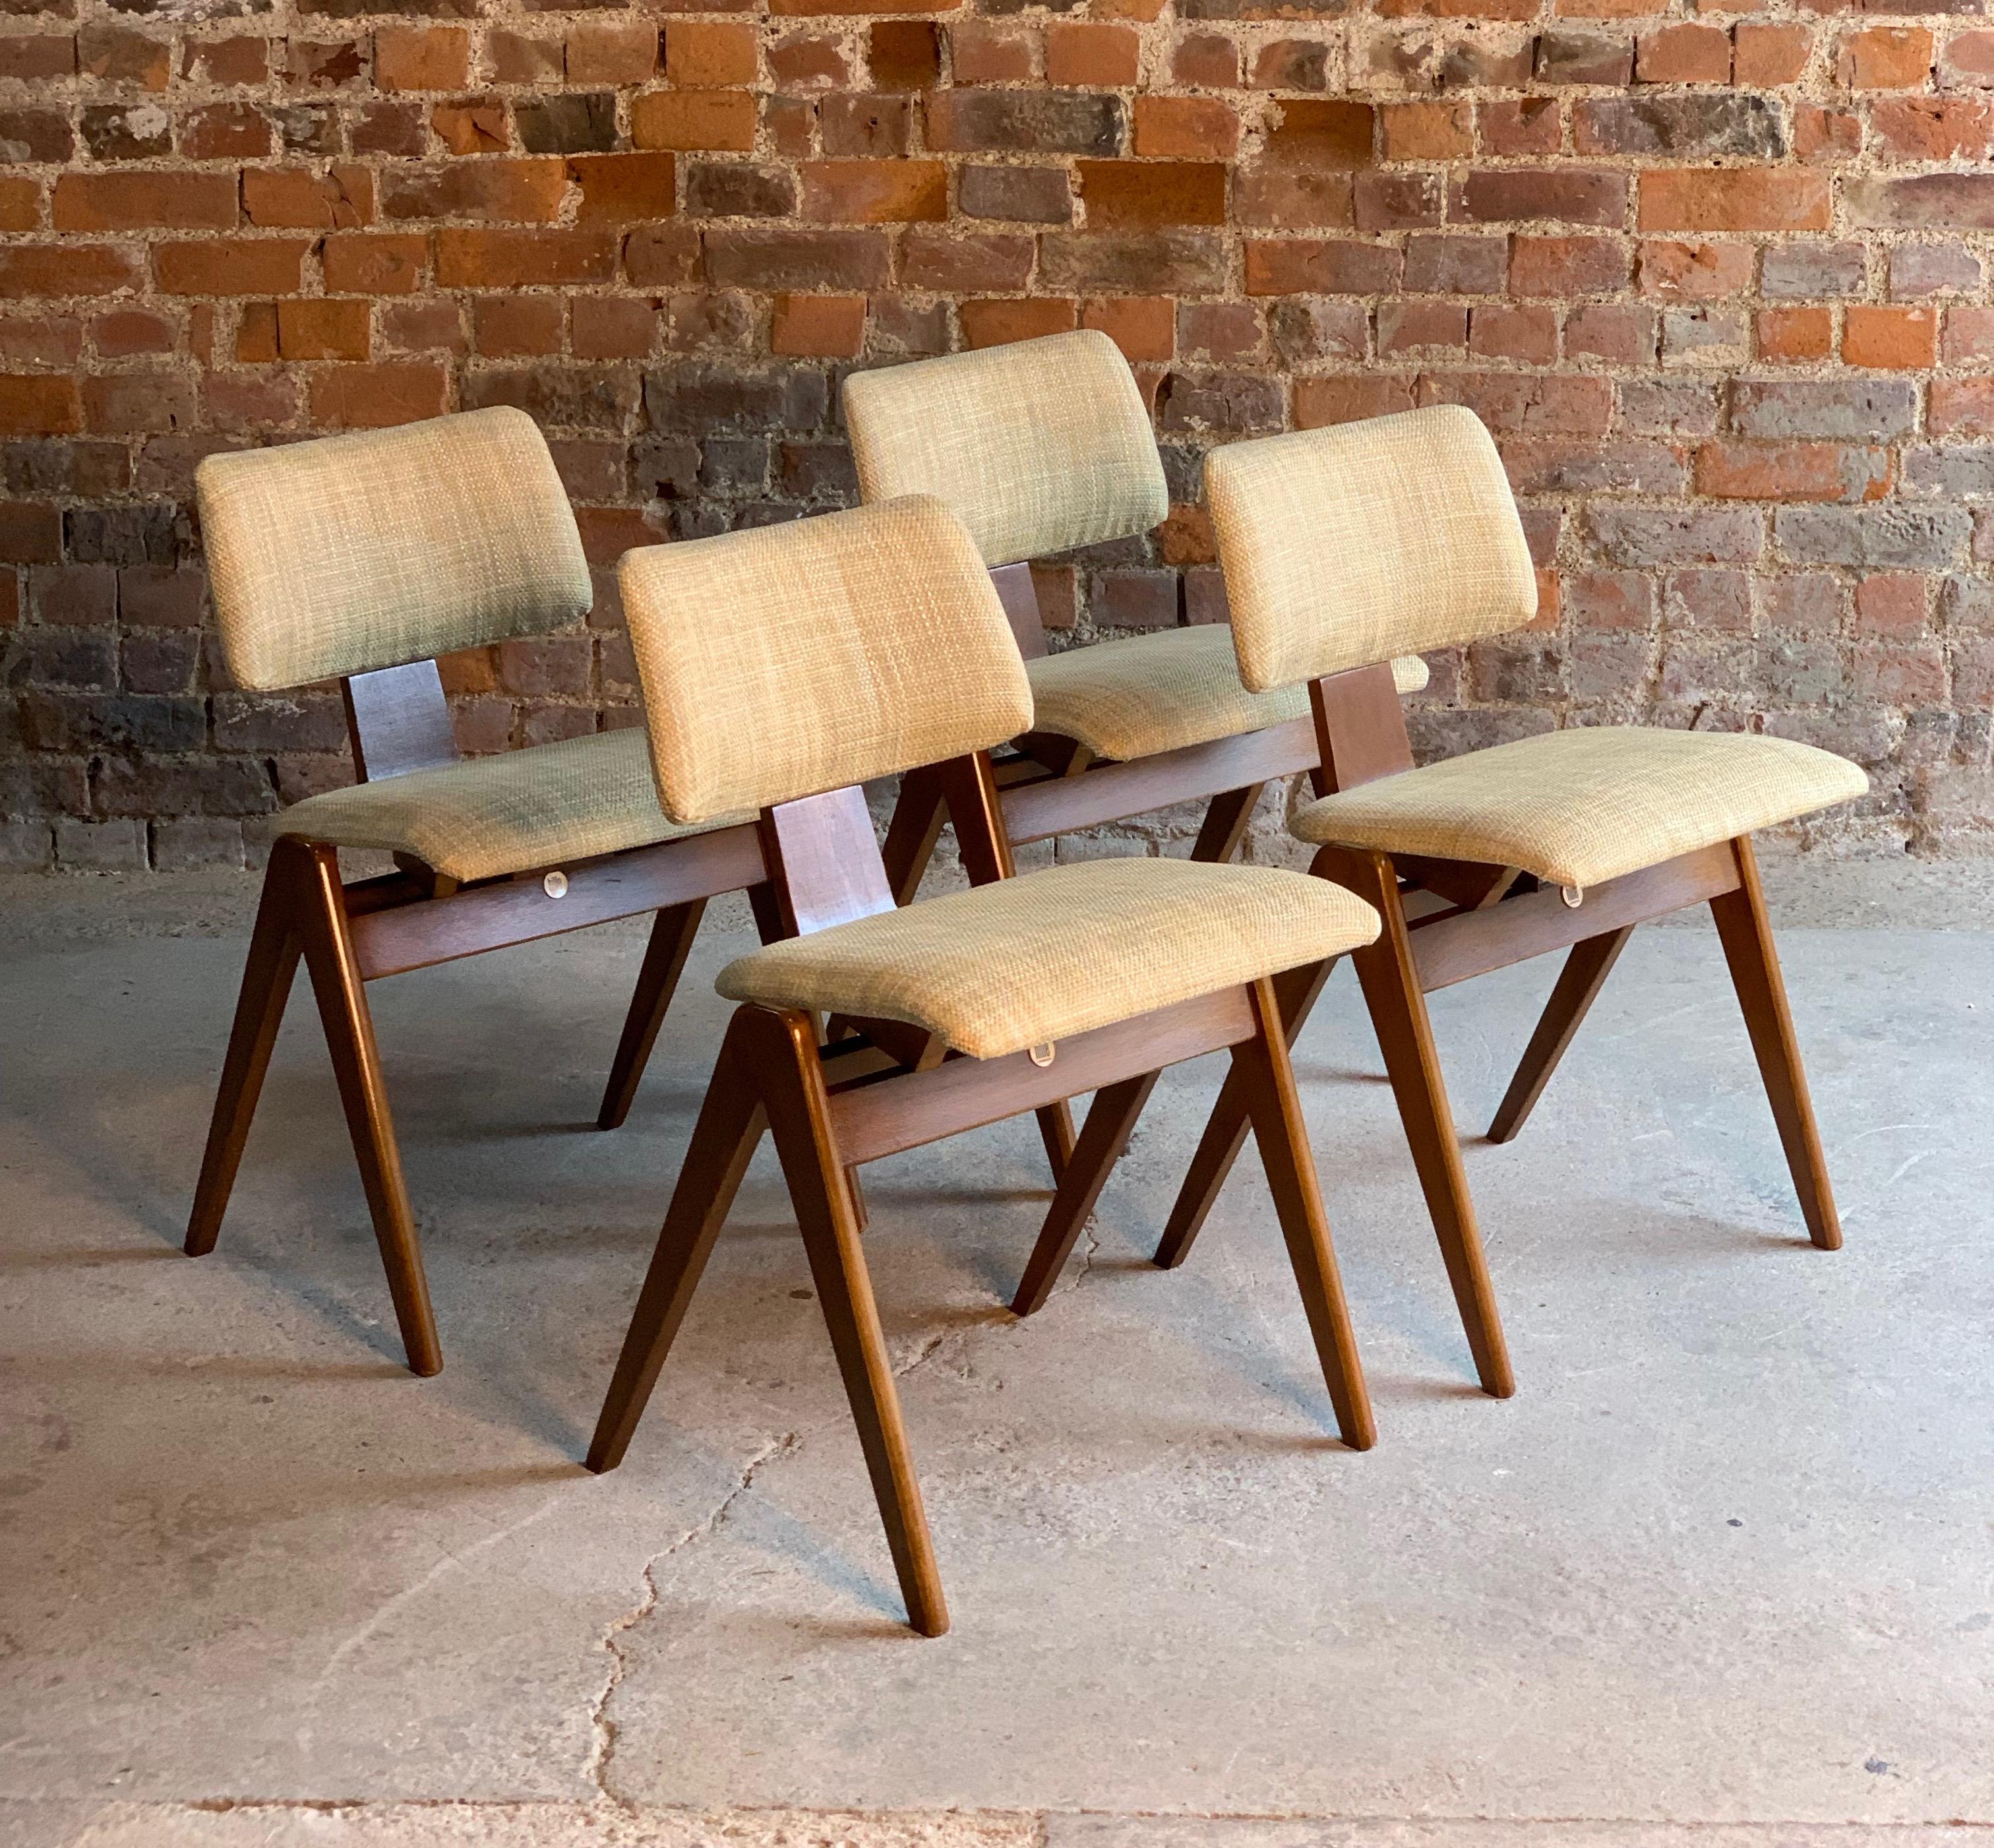 Beech Robin Day Hillestak Dining Table & Chairs by Hille Midcentury Design, circa 1950